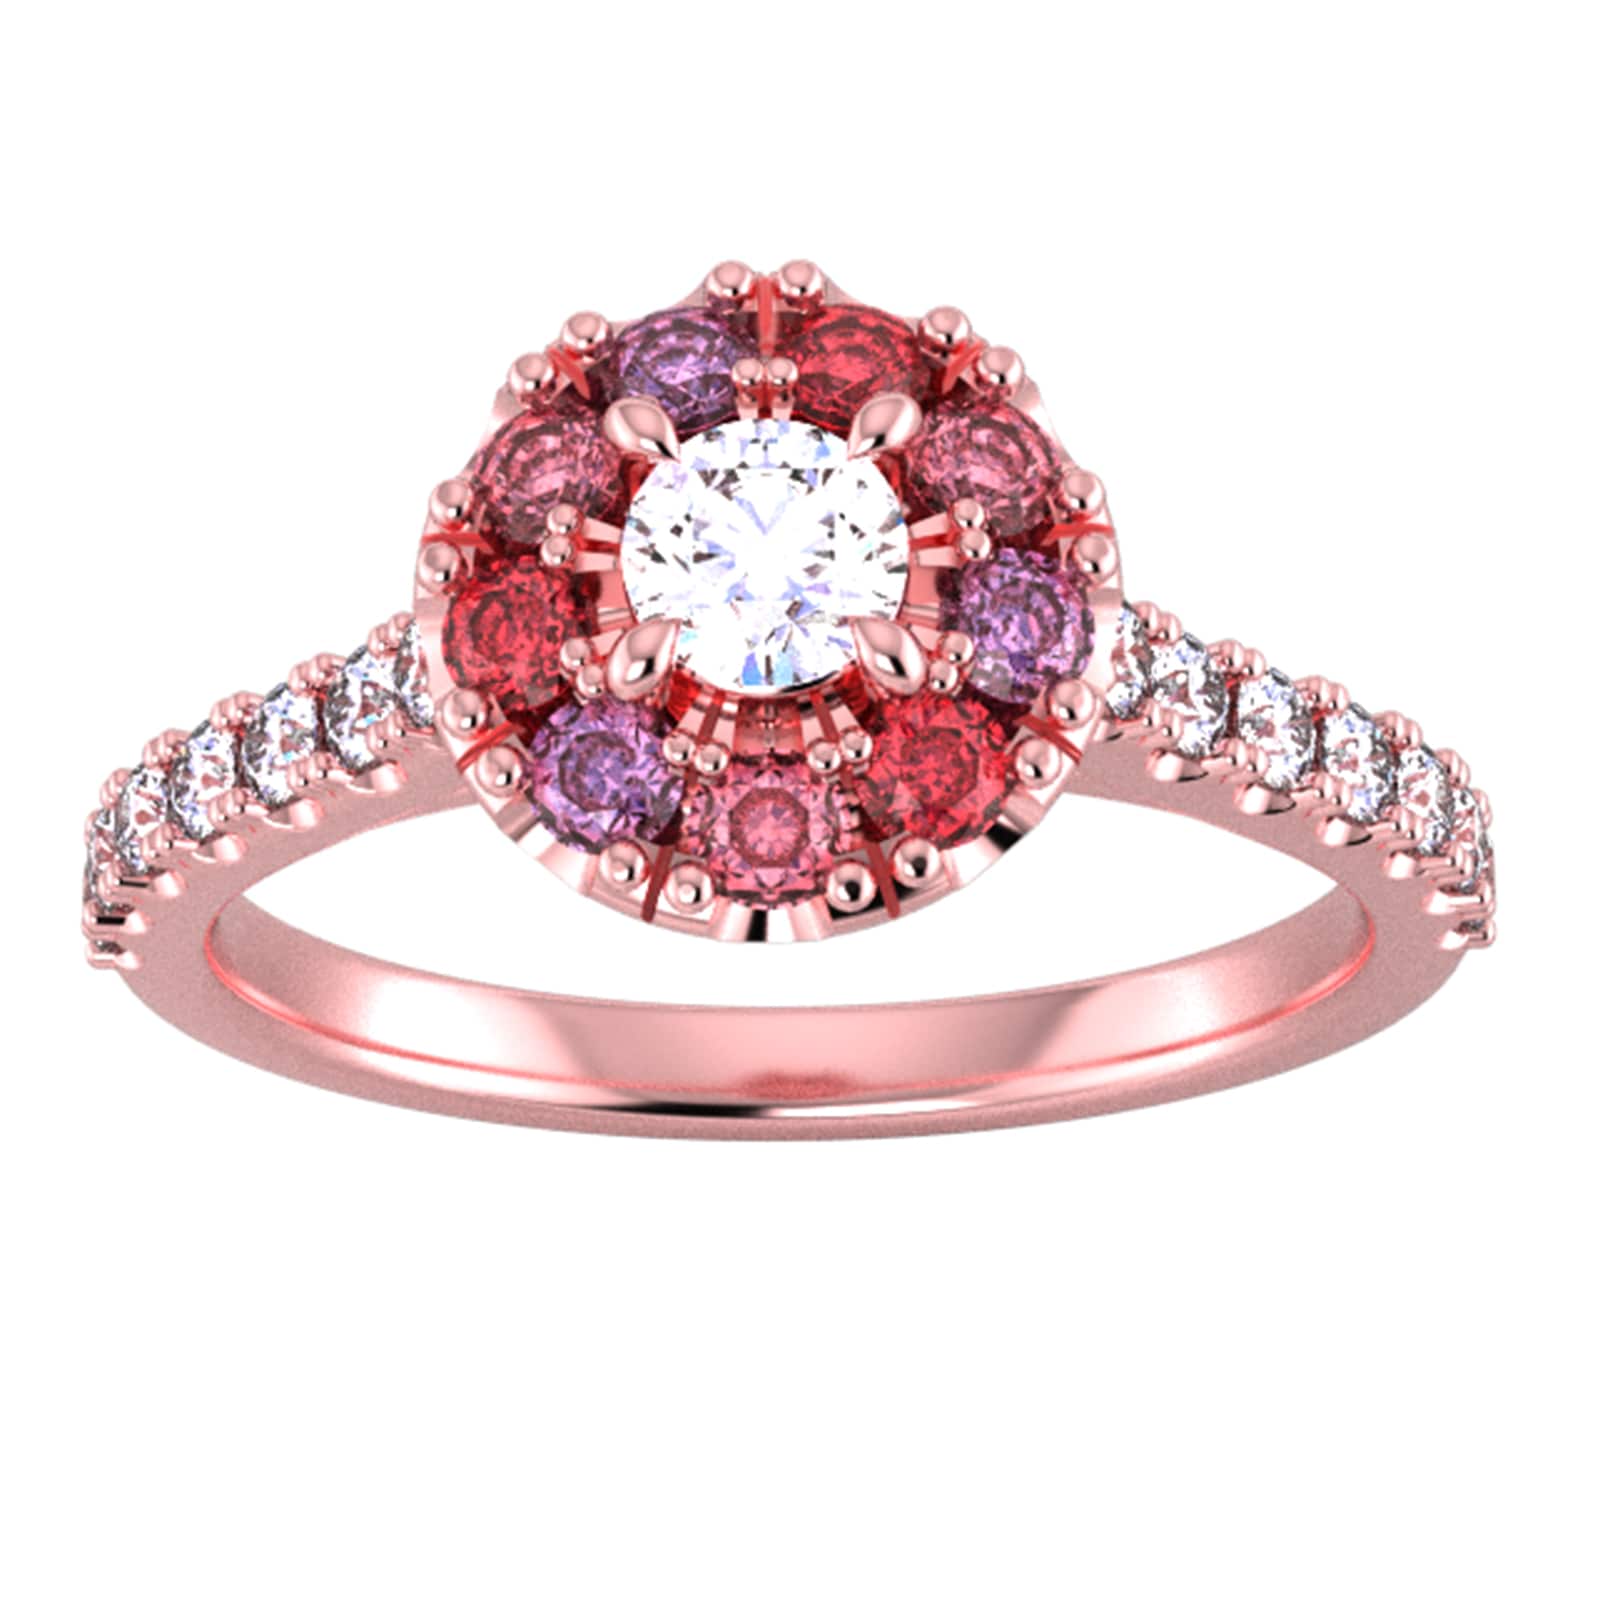 18ct Rose Gold Diamond & Red, Pink, Purple Sapphire Halo Ring - Ring Size W.5